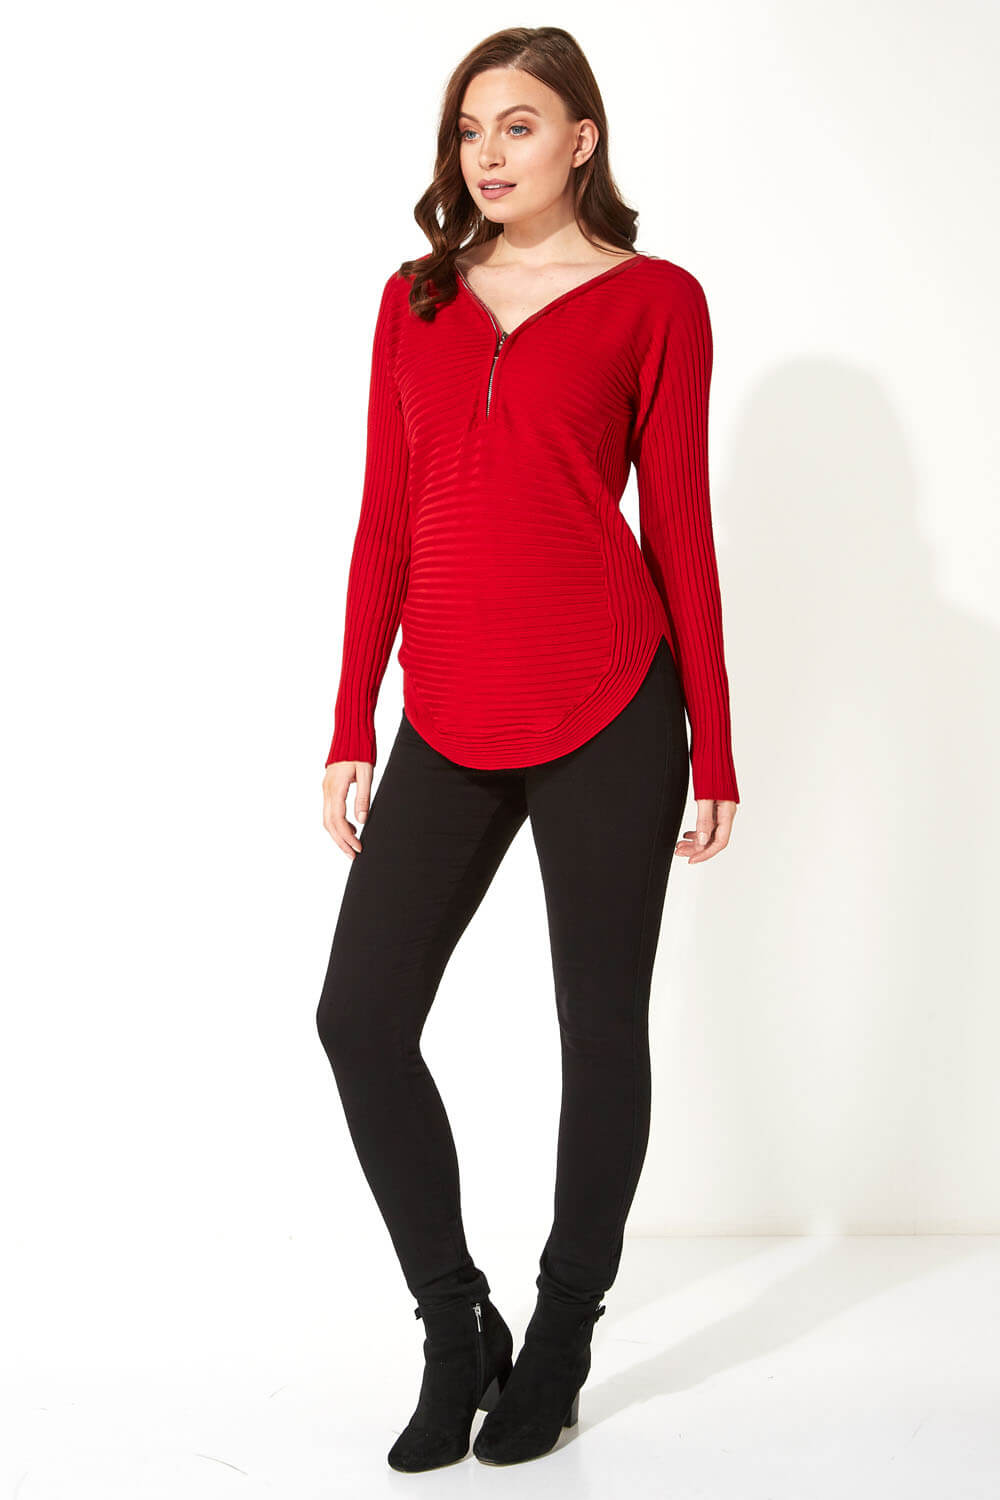 Red Zip Front V Neck Jersey Long Sleeve Top, Image 2 of 5